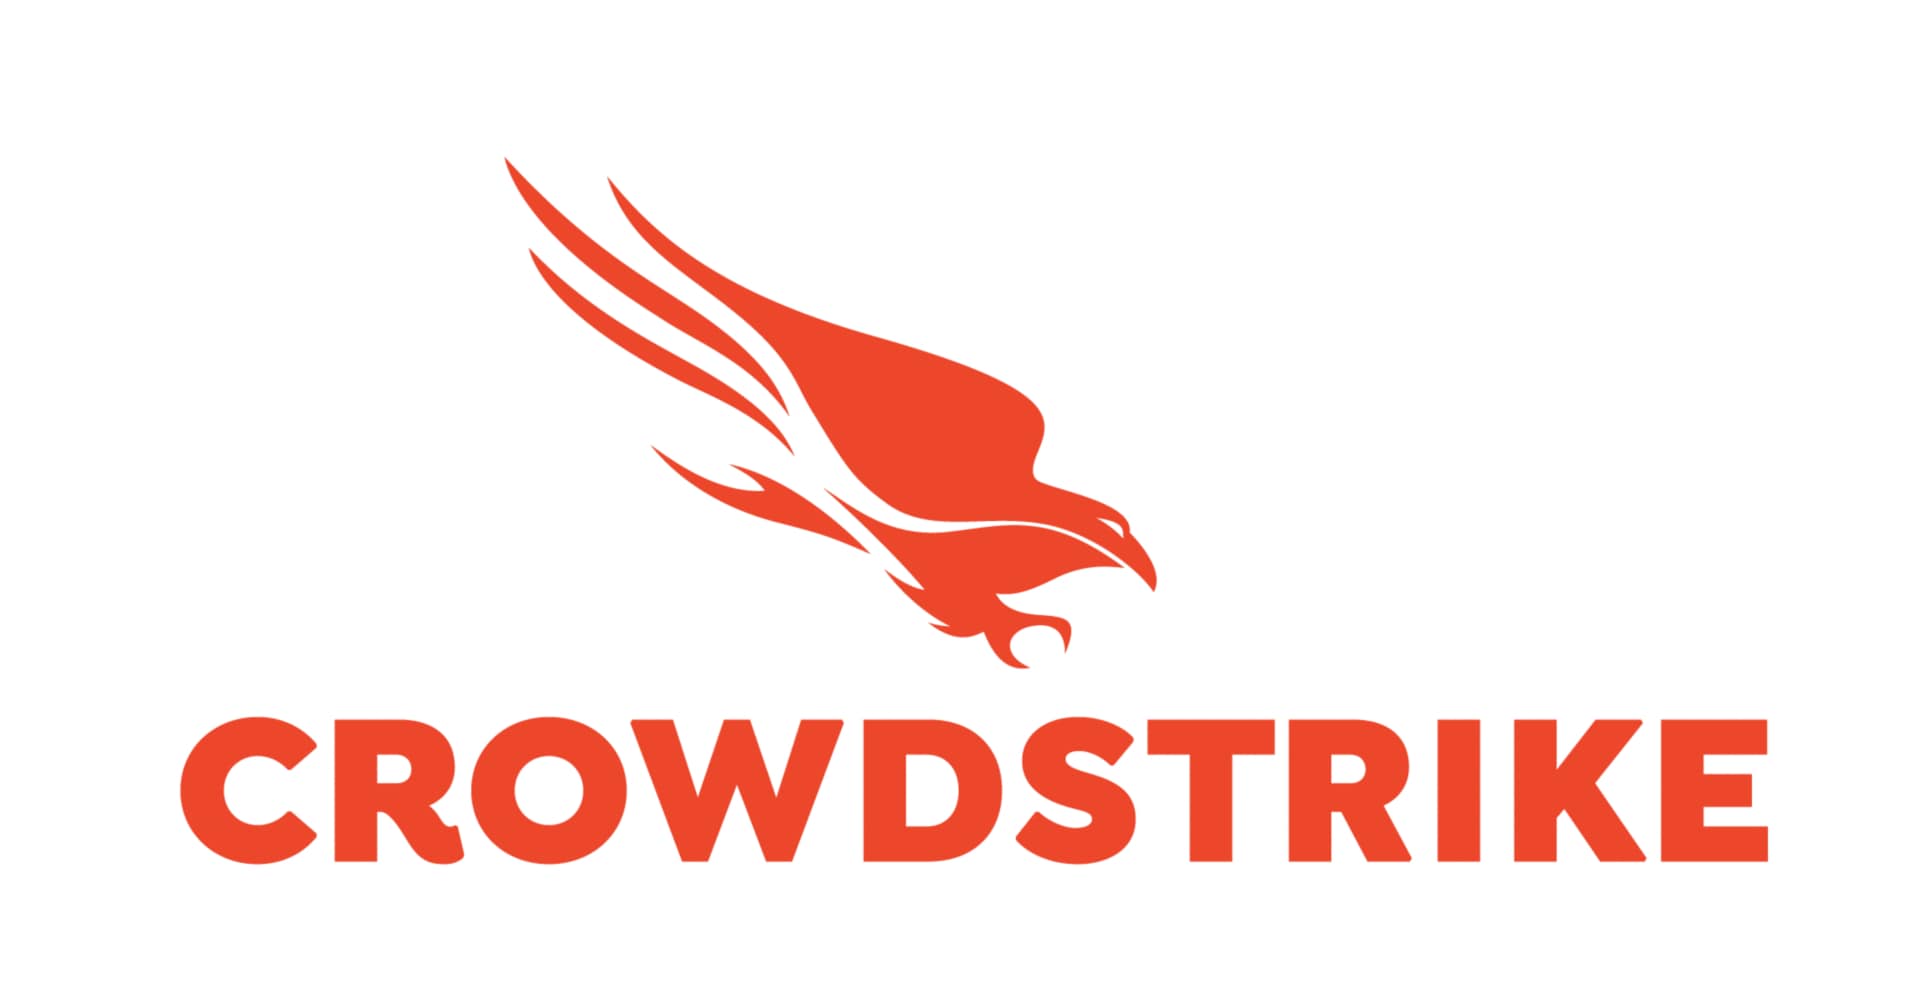 CrowdStrike 1-Month Falcon Firewall Management Software  (150-299 Licenses)